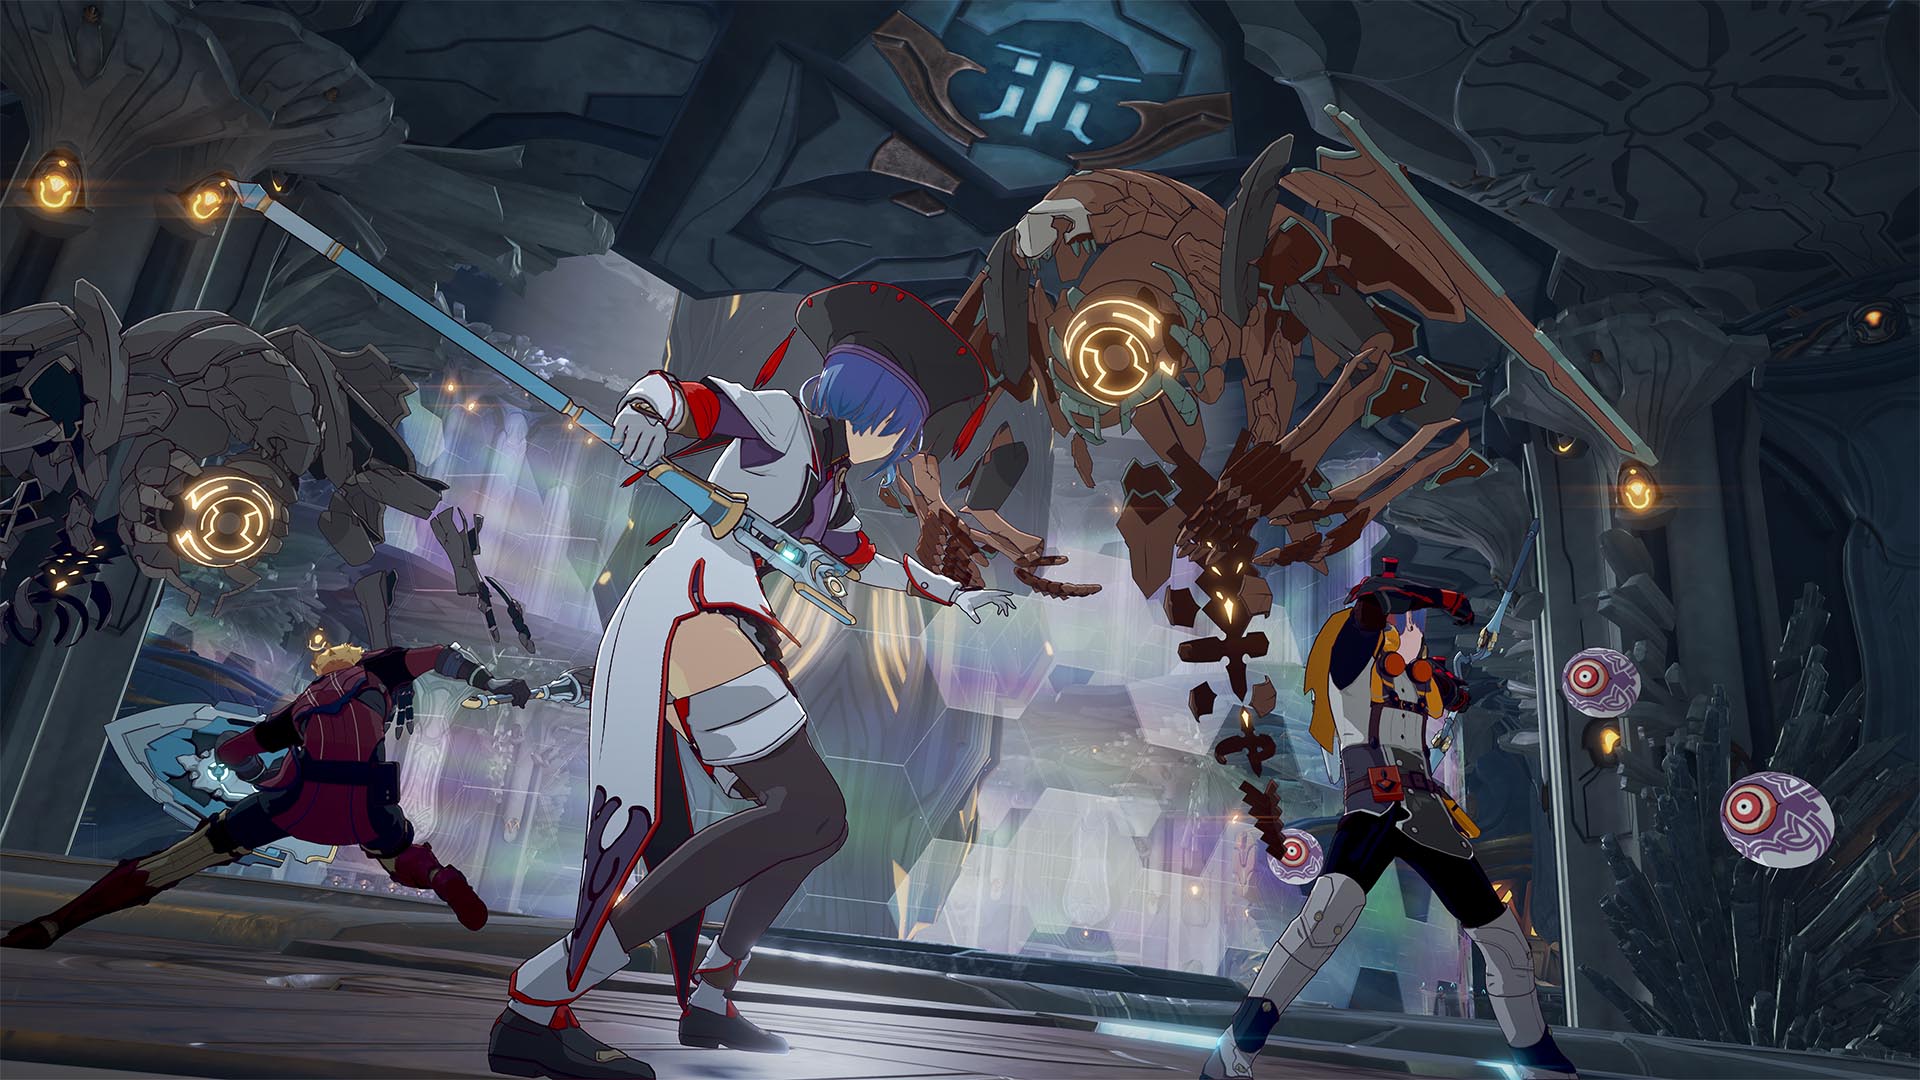 Preview: Blue Protocol Offers Dynamic Action in an MMORPG